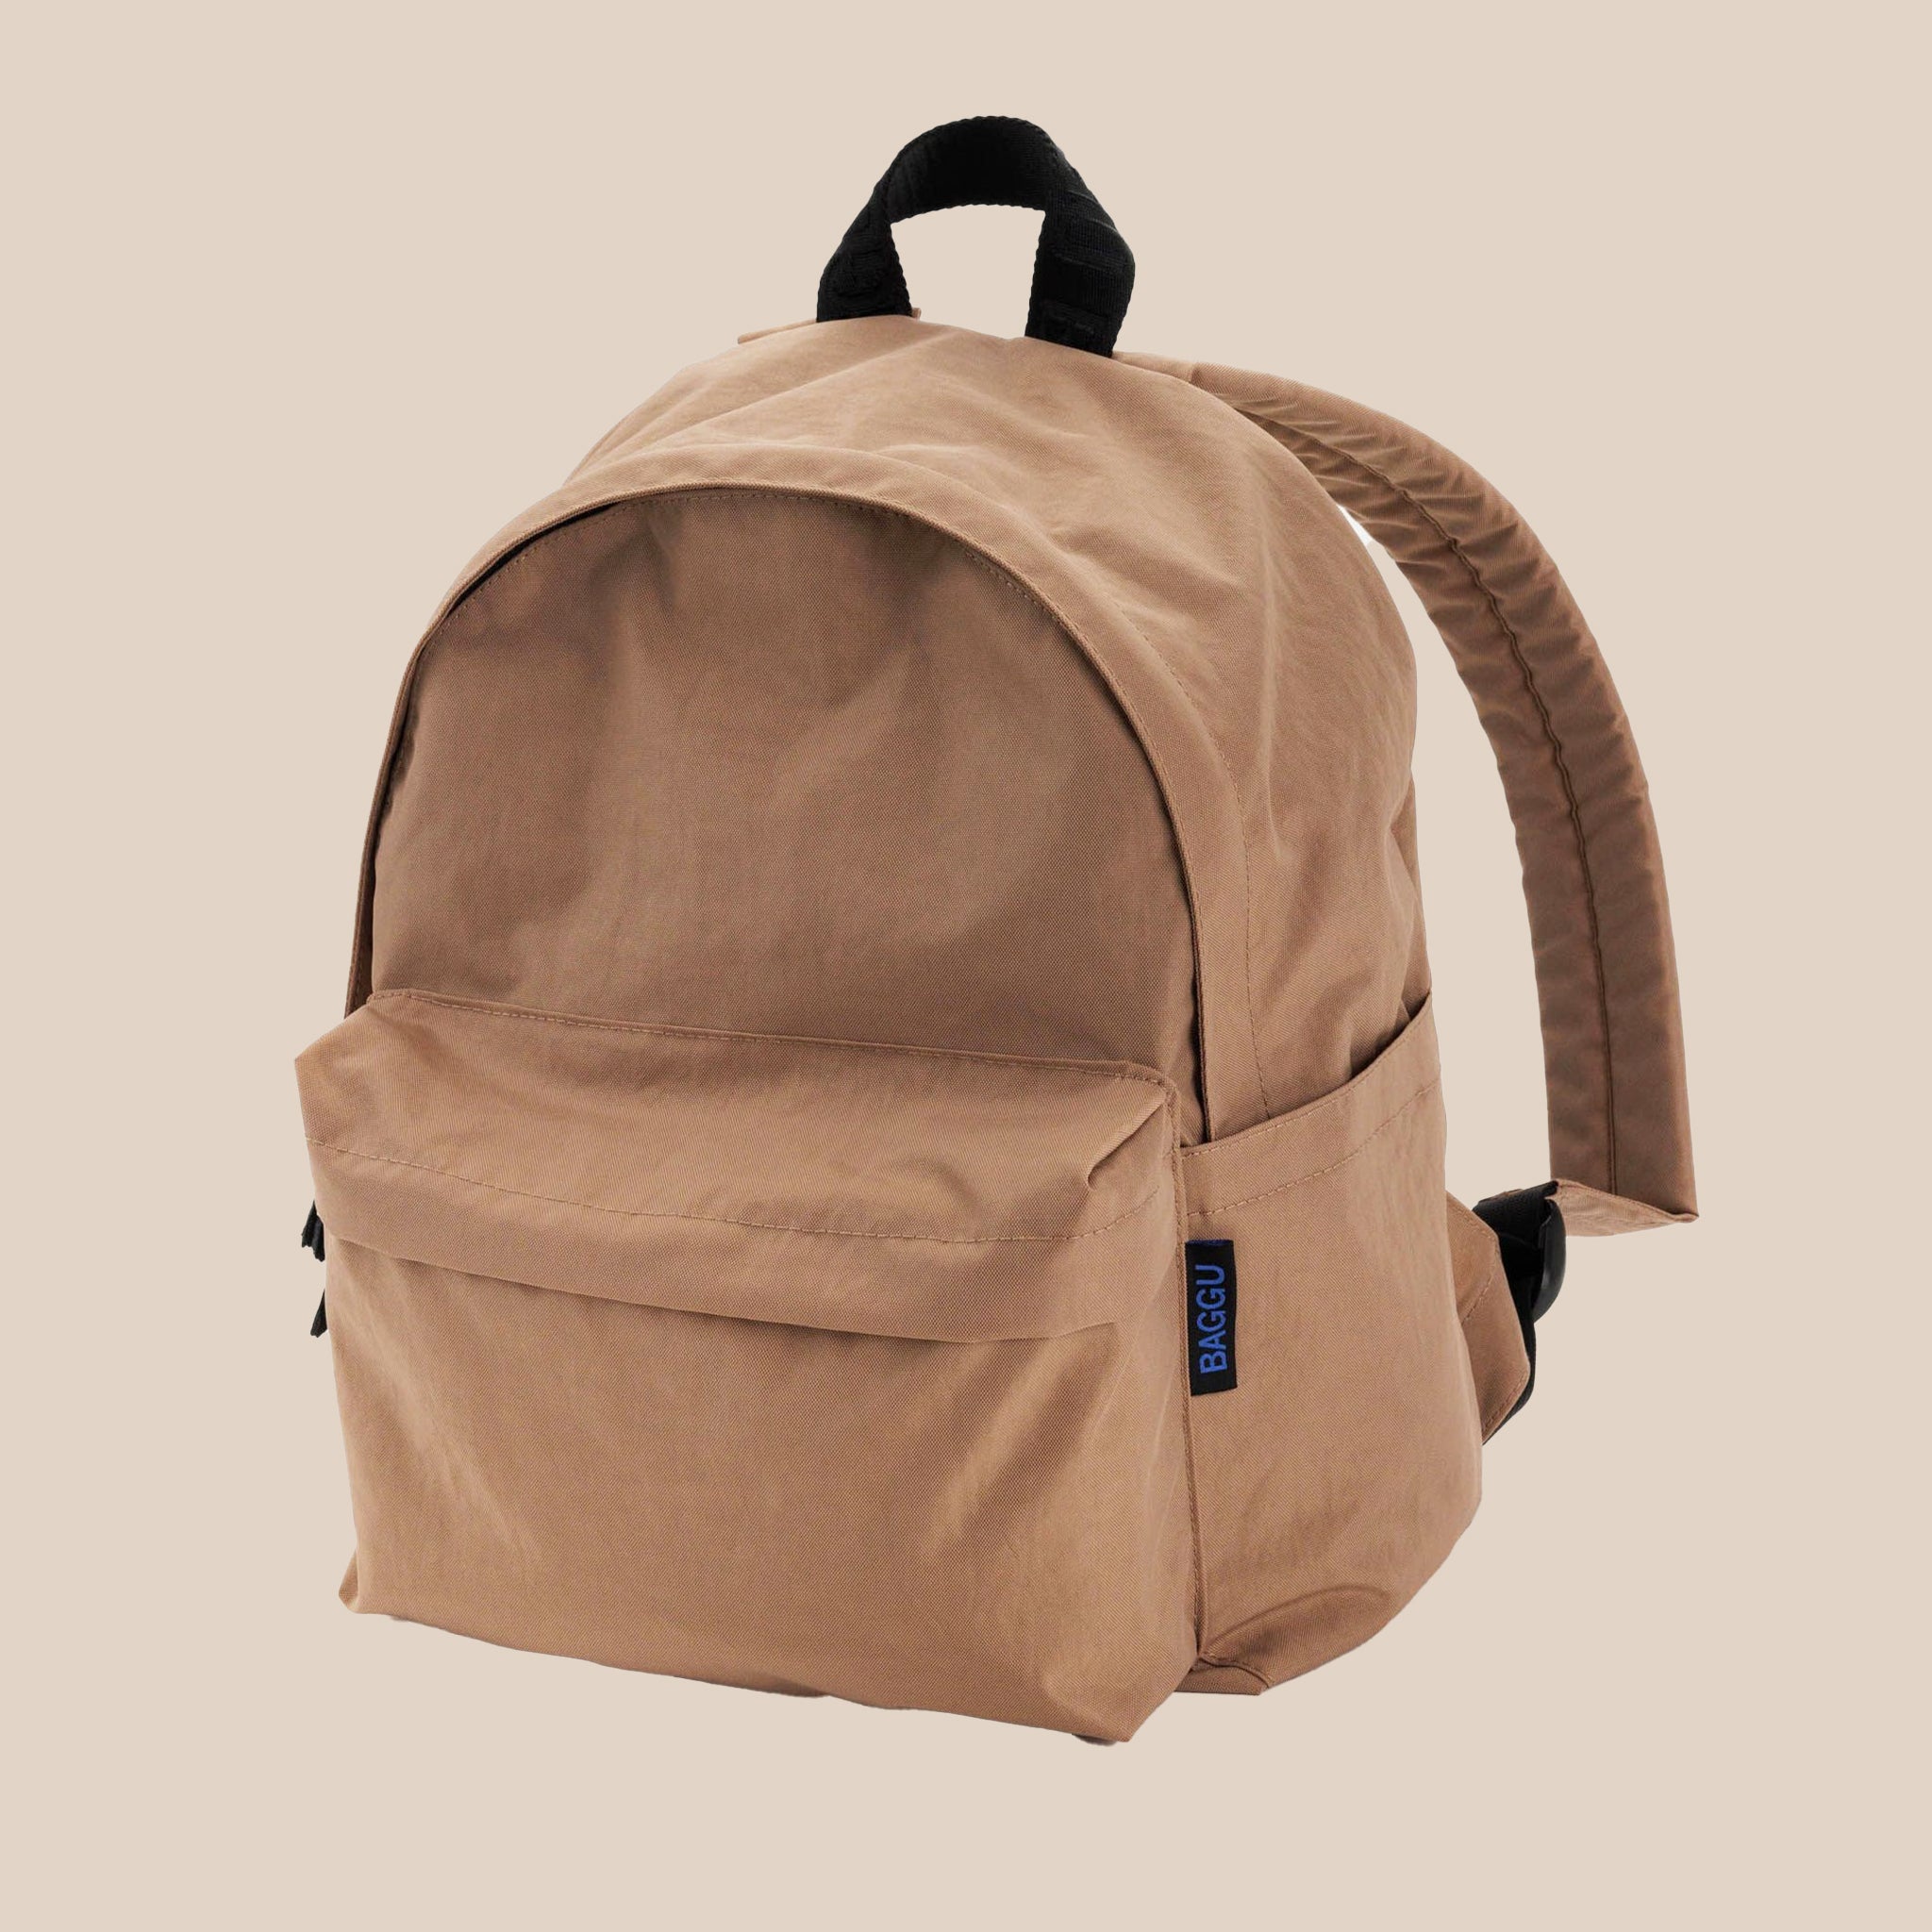 A nylon backpack in a tannish brown color with black straps and two front zipper compartments. 